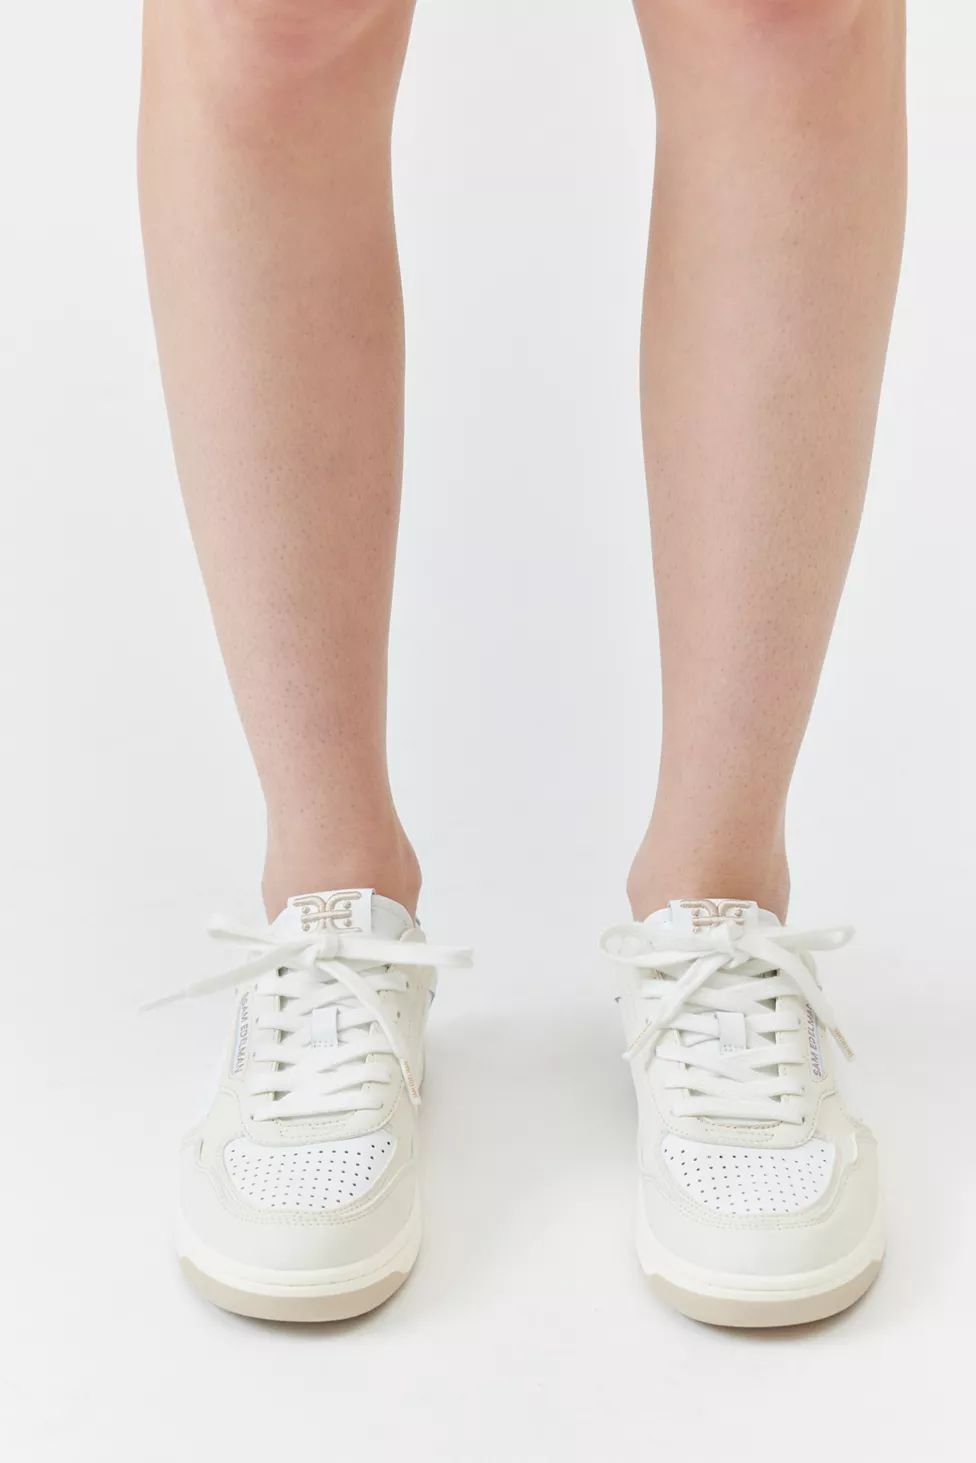 Sam Edelman Harper Sneaker | Urban Outfitters (US and RoW)